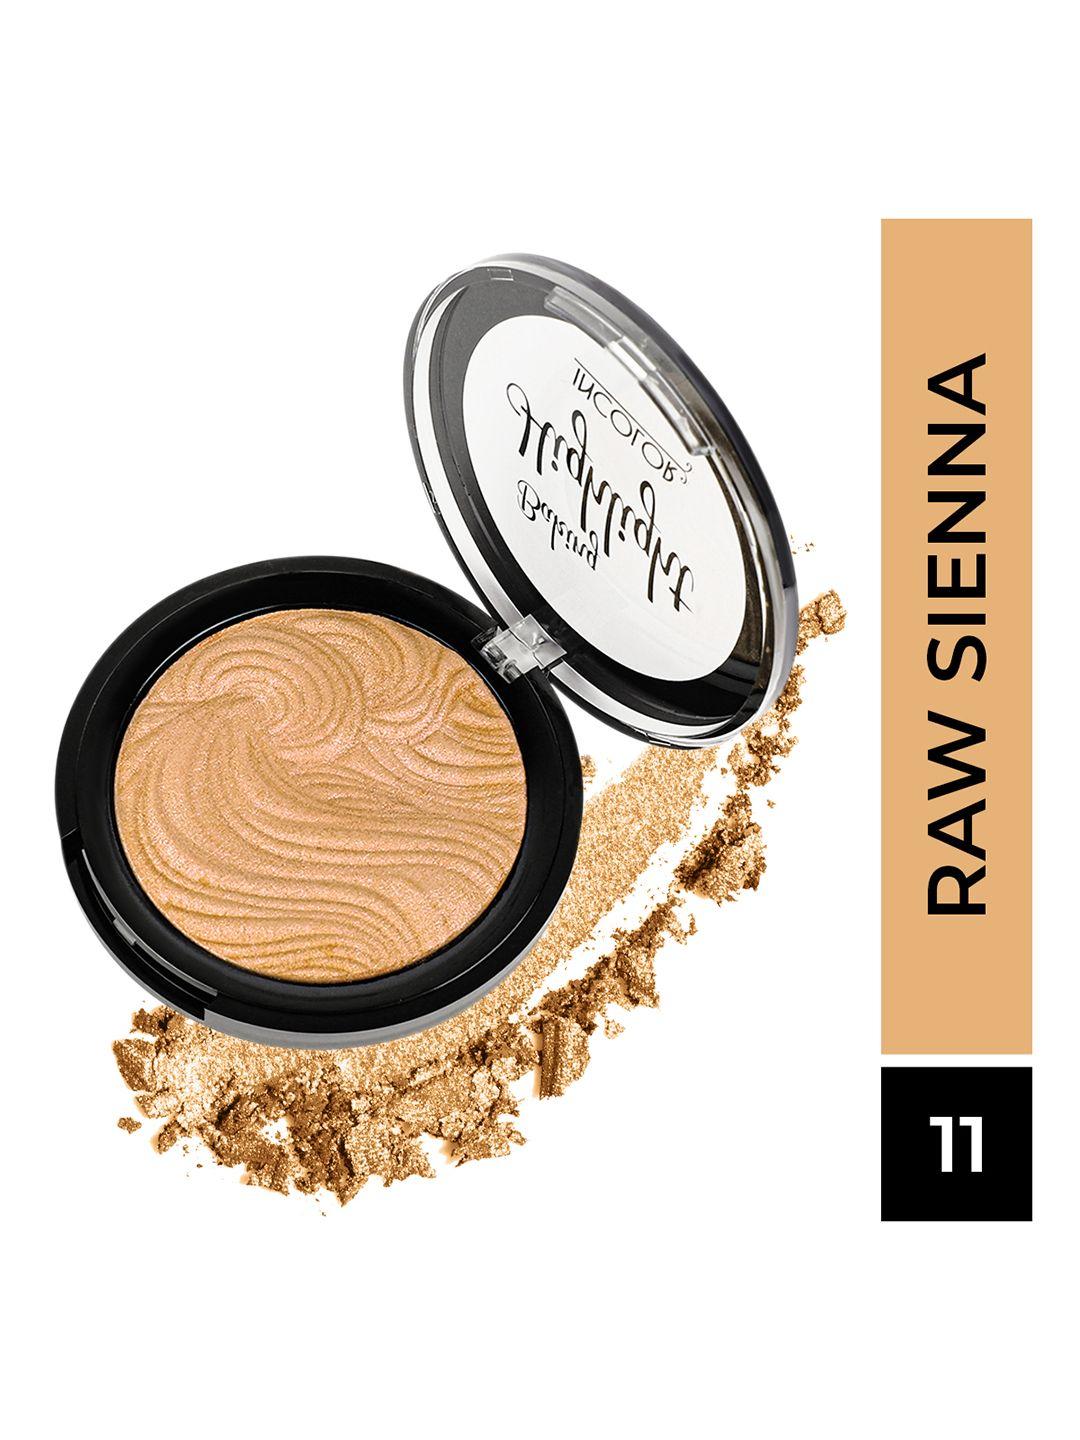 incolor women baking highlighter 11 - raw sienna 9gm